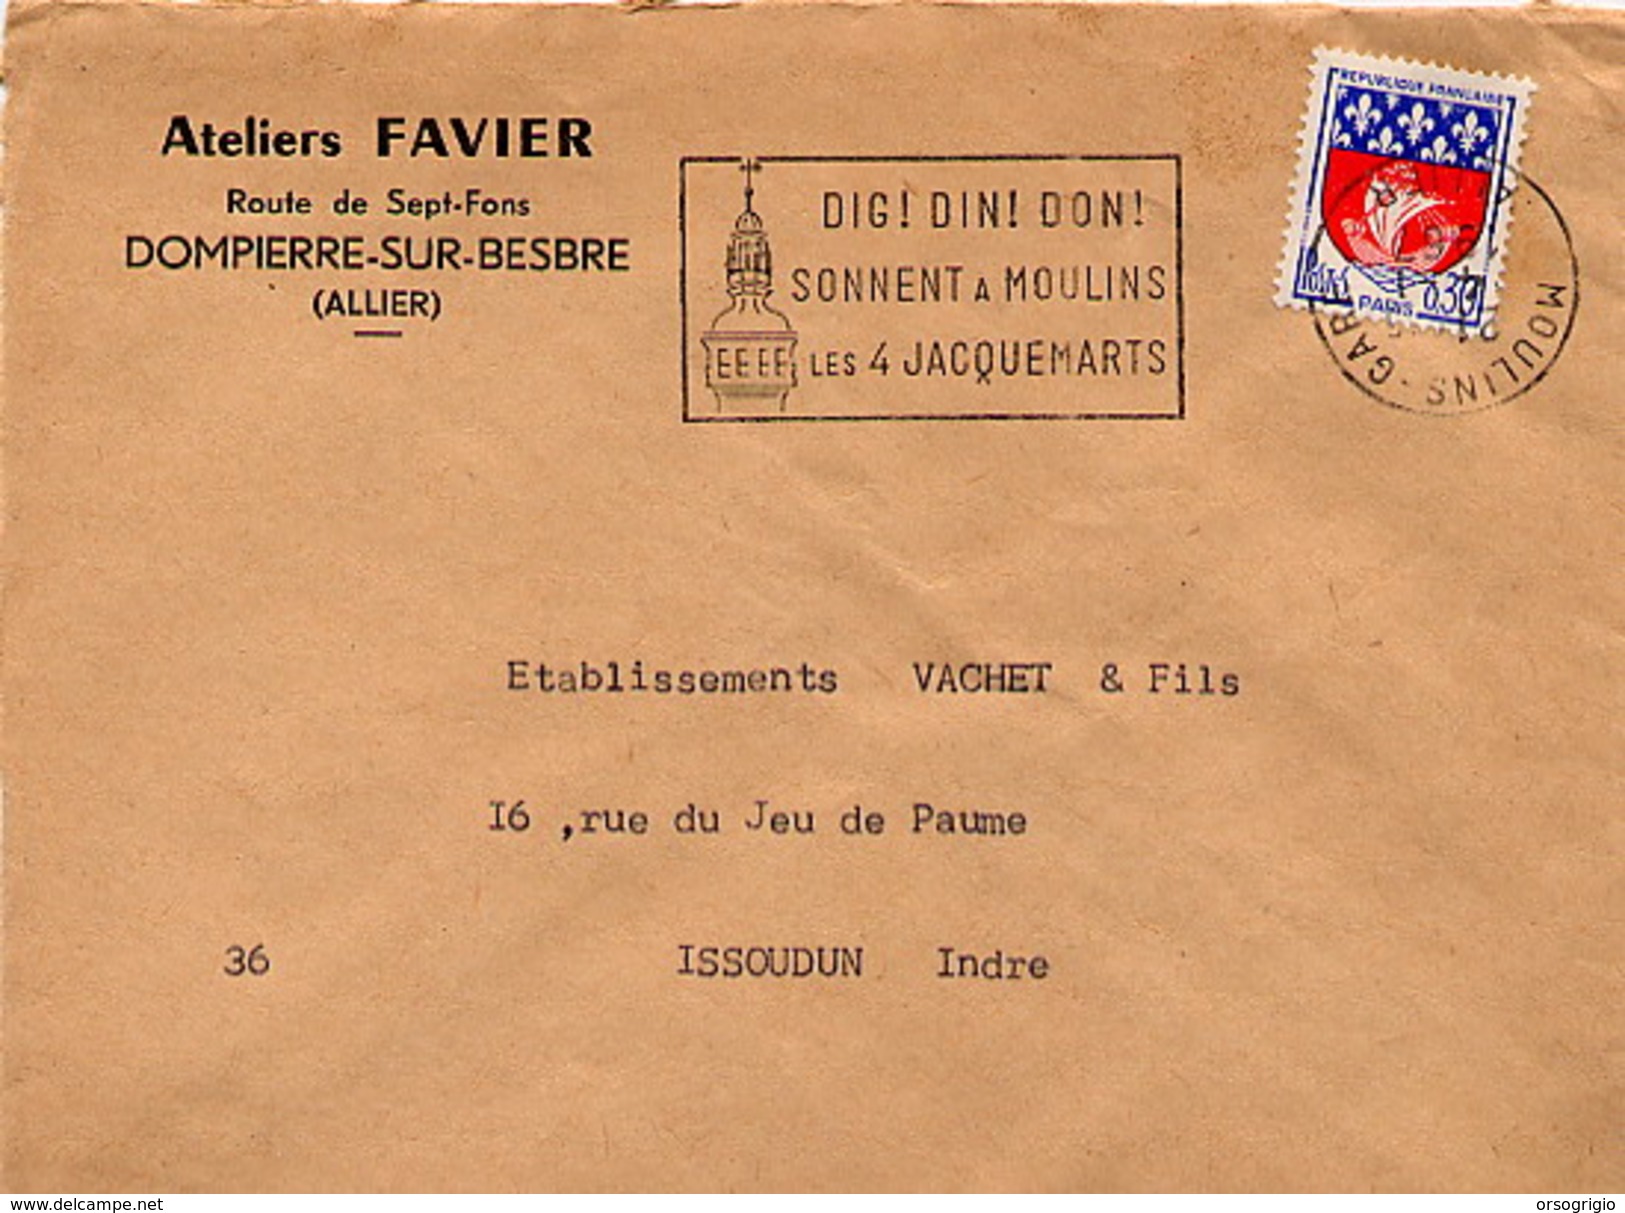 FRANCE -  MOULINS 1967 - DIG ! DIN ! DON ! SONNENT LES 4 JACQUEMARTS - TIMBRO DATARIO CAPOVOLTO !!!!!!!!!!!!!!!!!!!!!!!! - Lettres & Documents